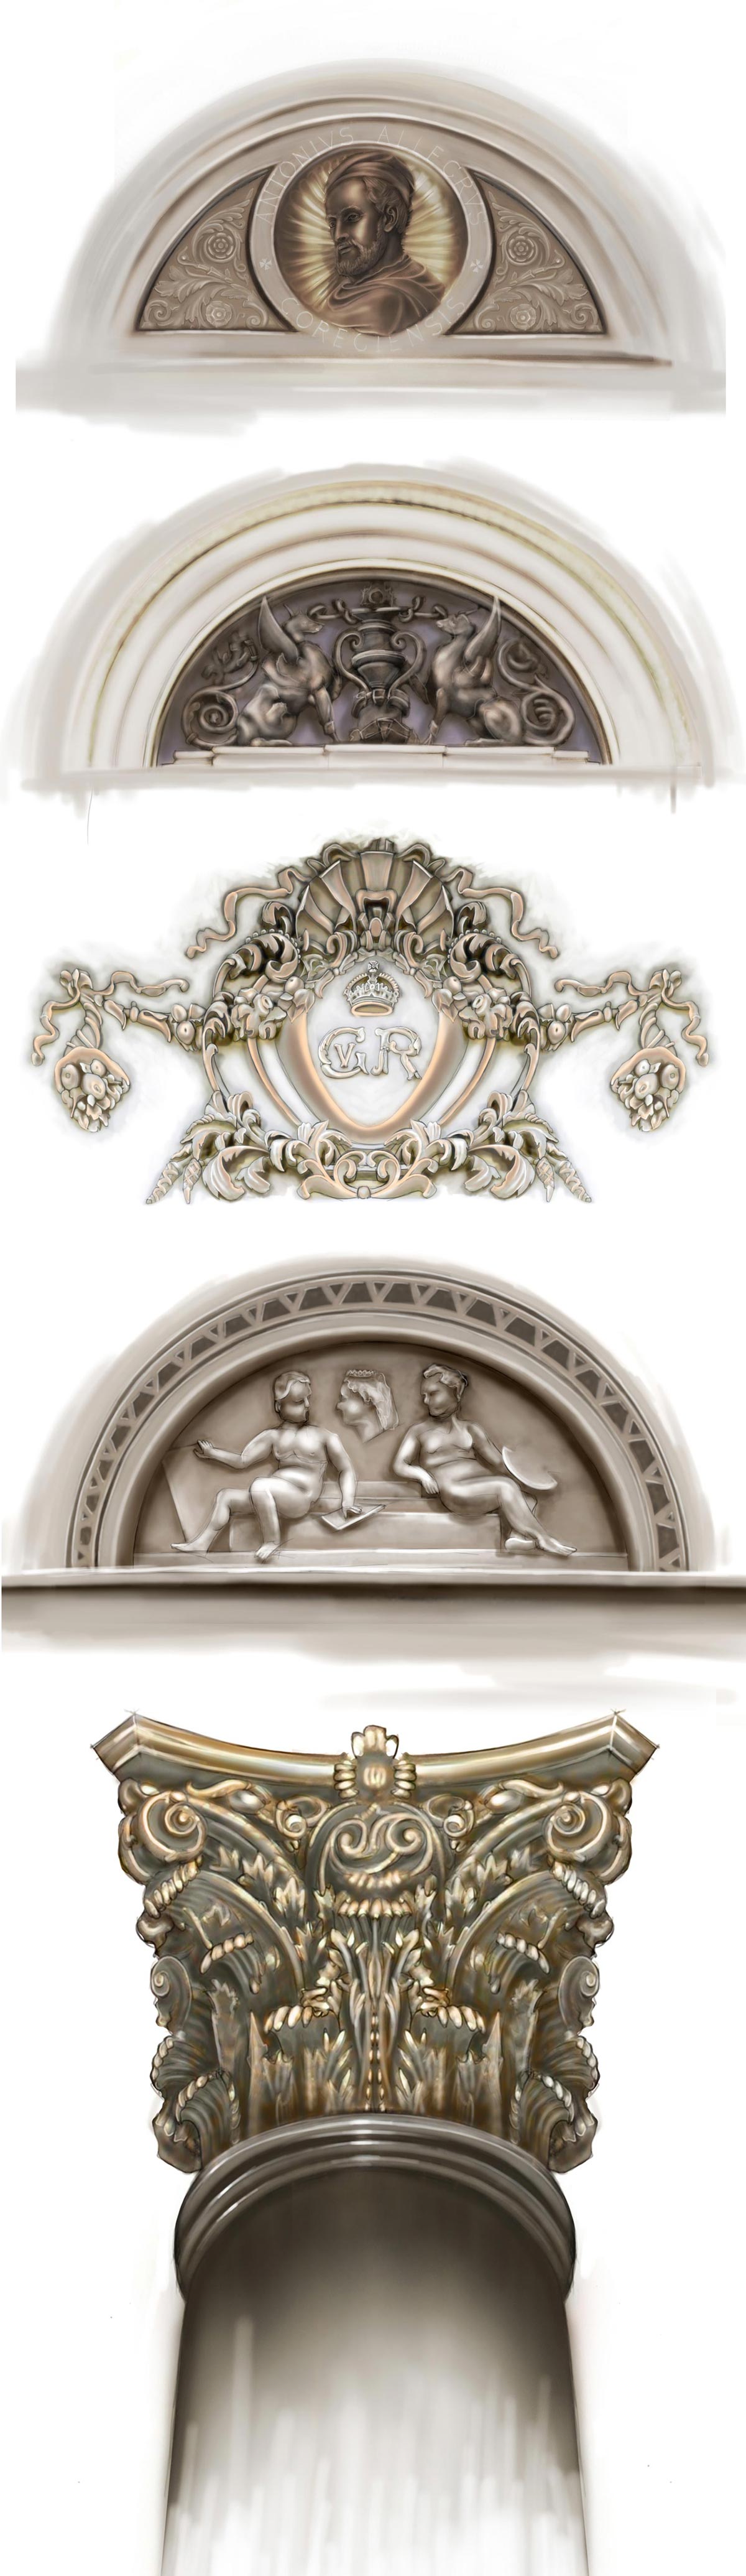 national-gallery-ornament